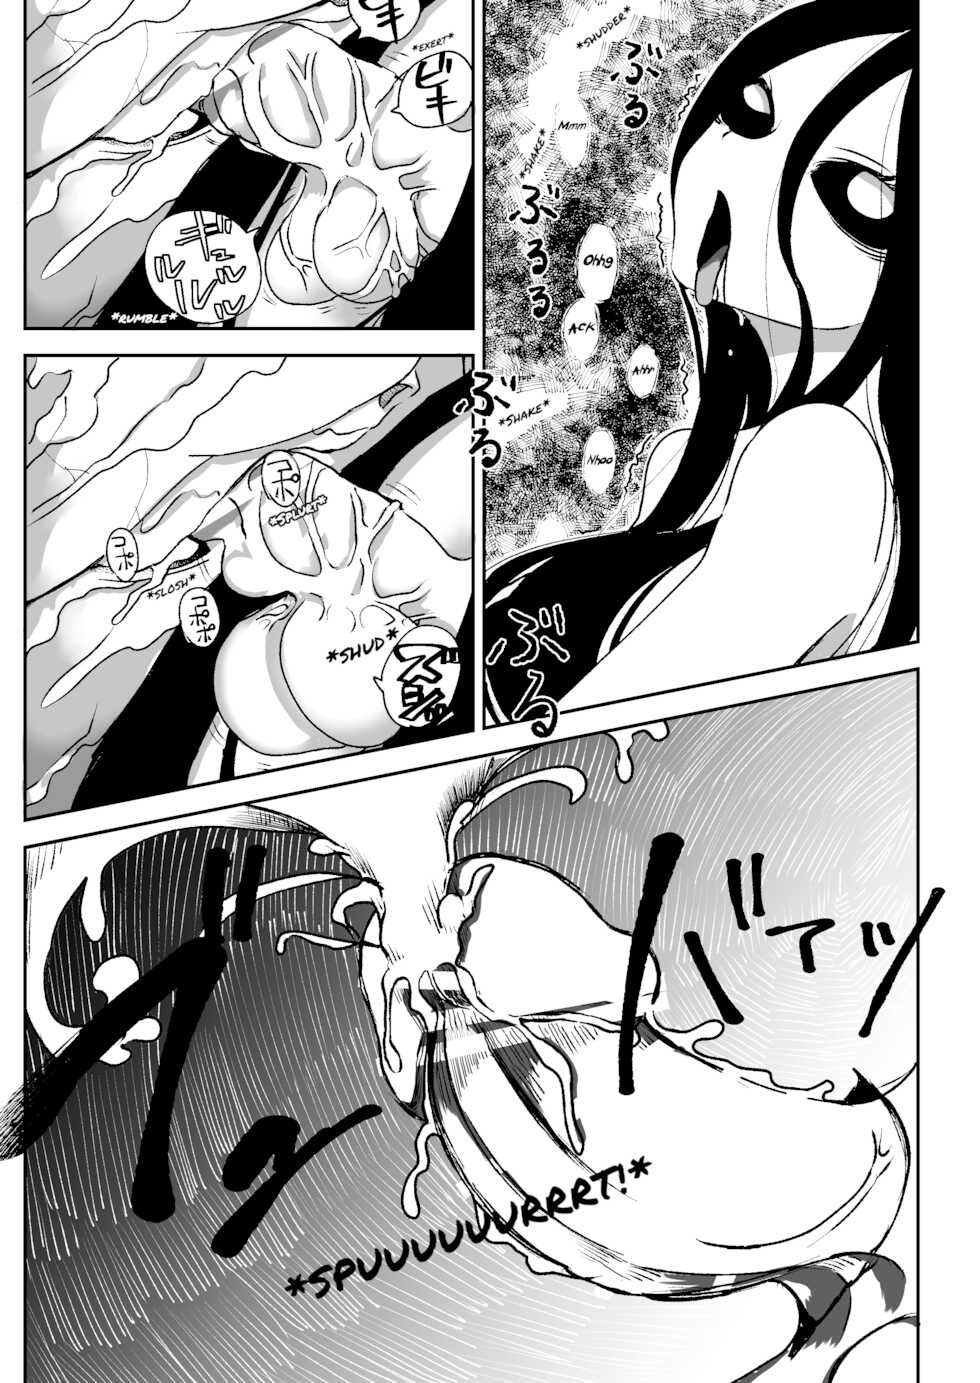 [Shimanami (Archipelago)] Dead End House Anthology - (The Chandelier/1.5/The Exorcist/Spinoff Expansions) [Ongoing] - Page 23